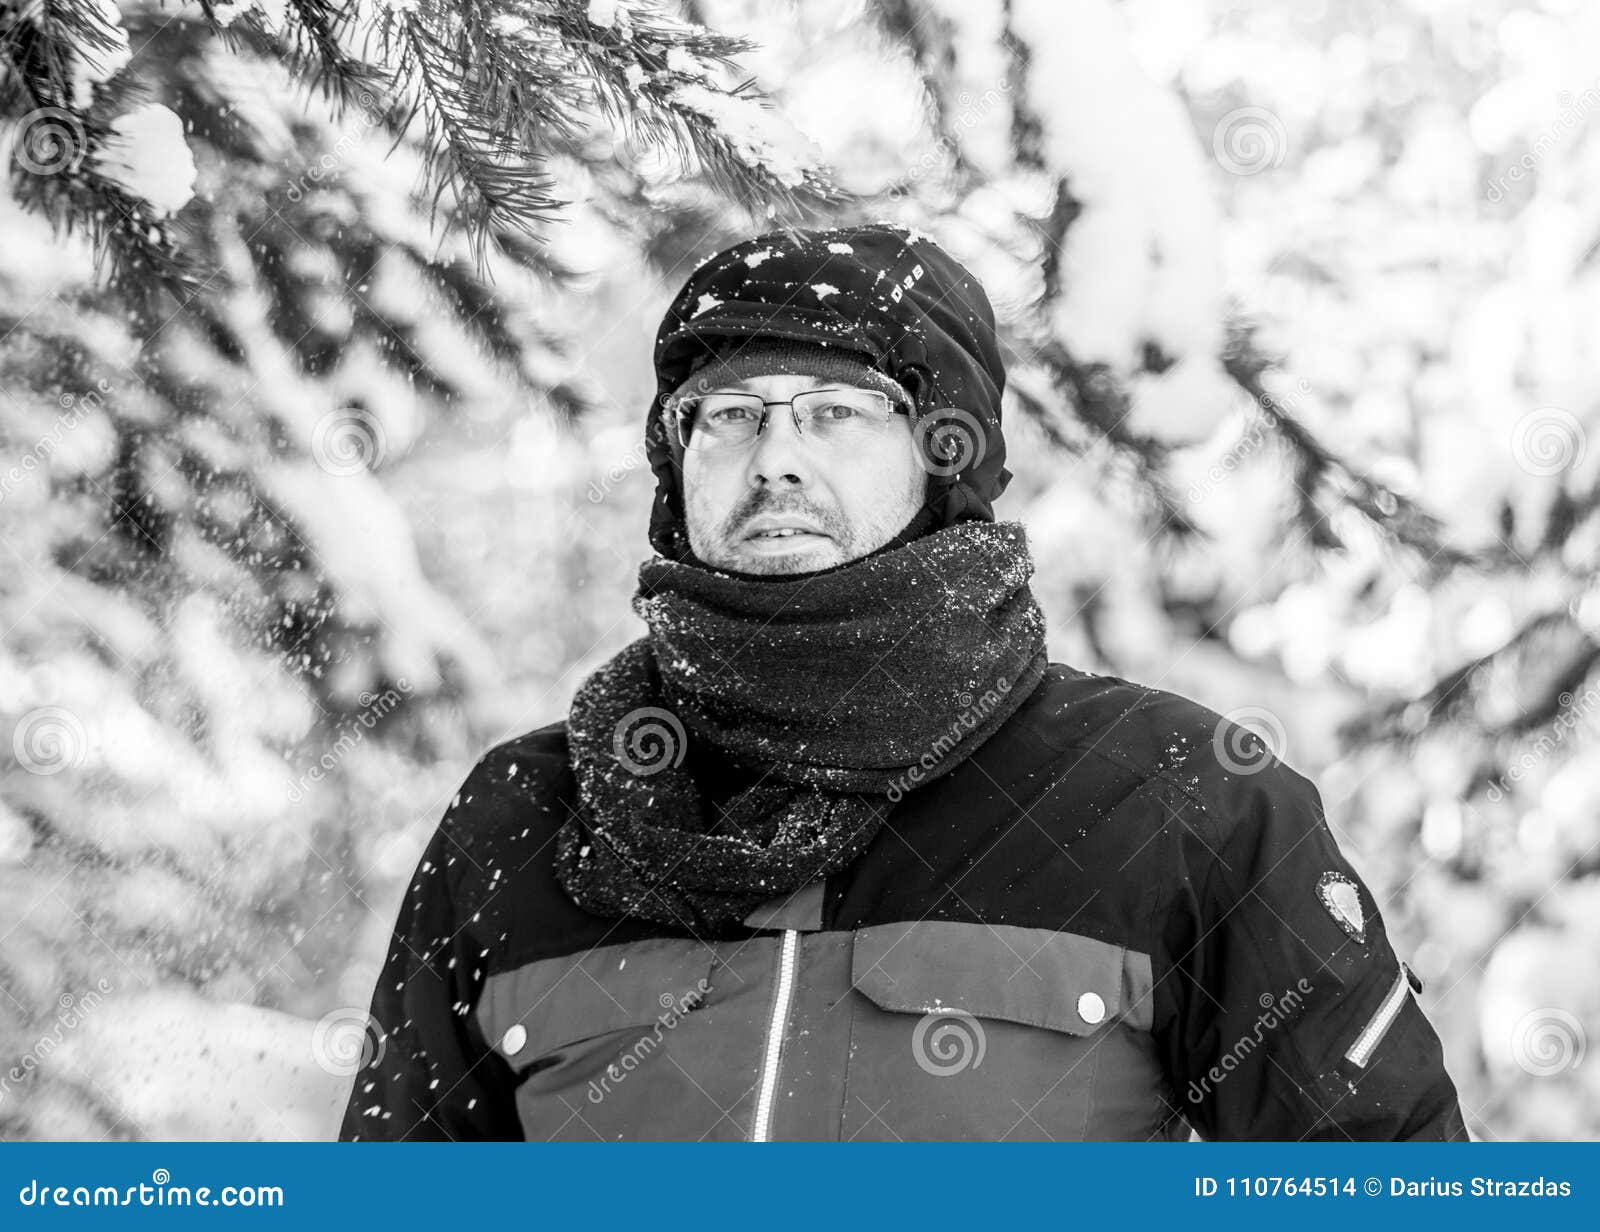 Man in Winter Posing while Snowing in Forest Stock Photo - Image of ...